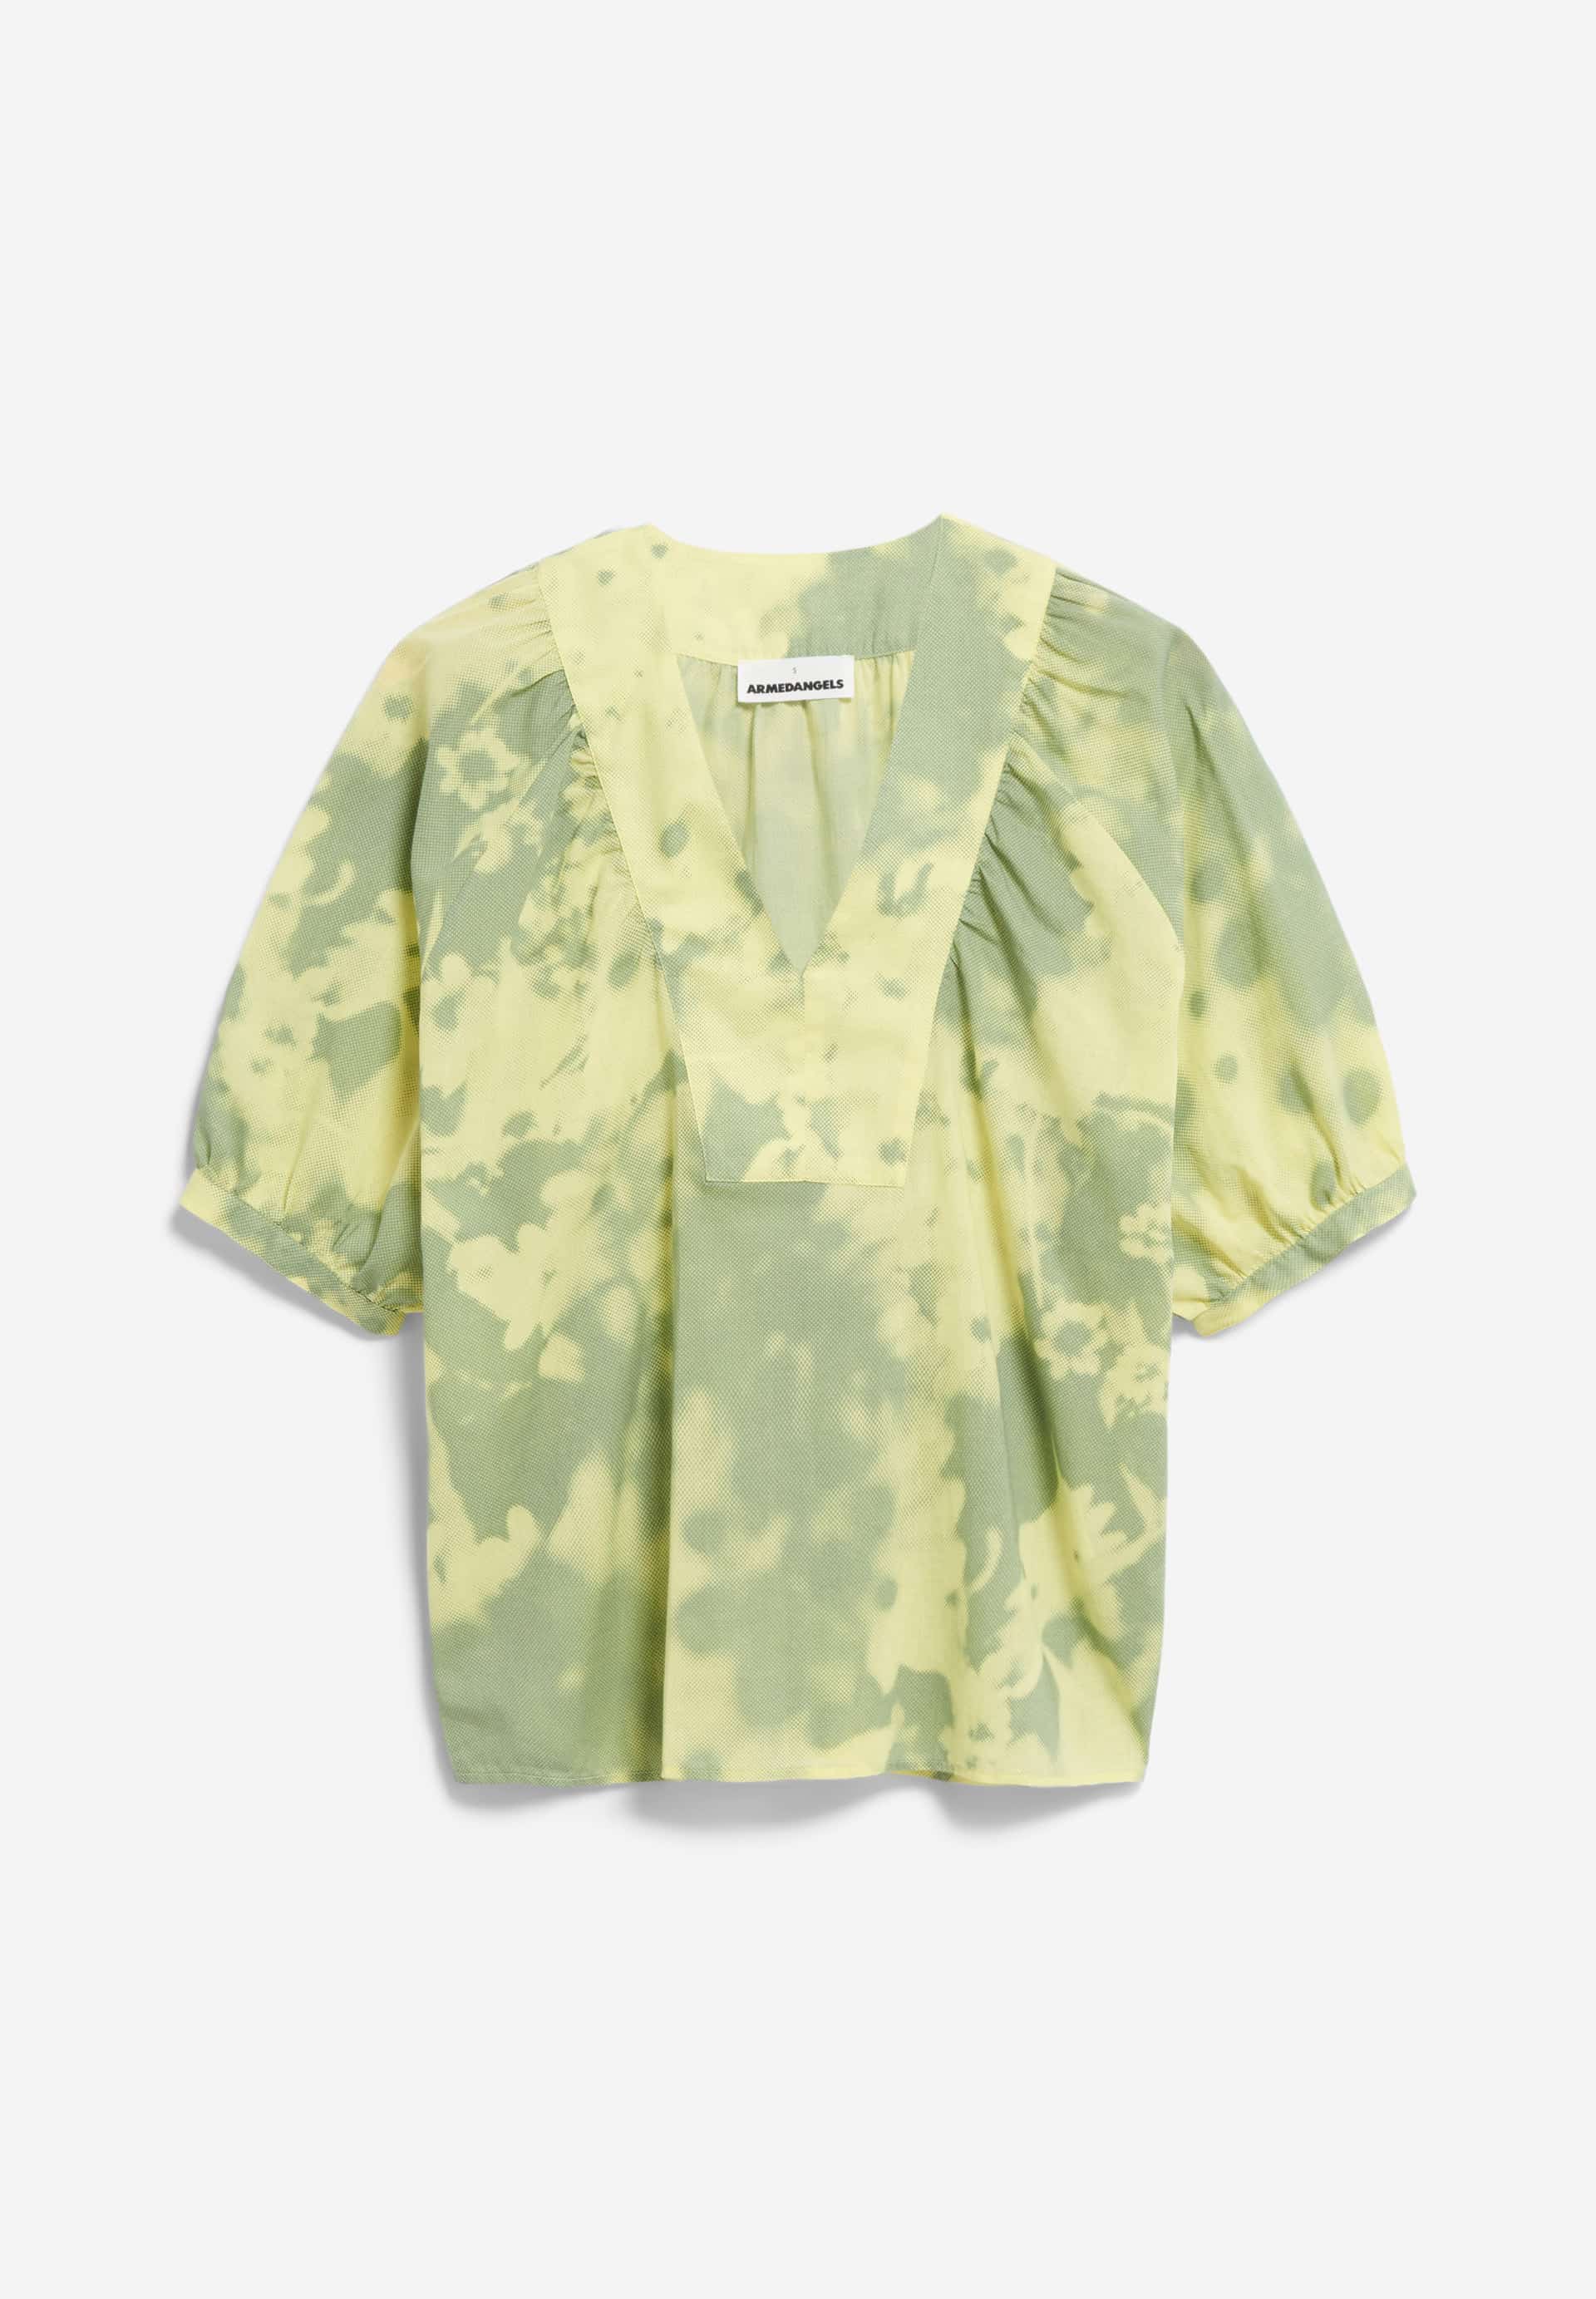 ISILDAA BLOMMAA Blouse Loose Fit made of Organic Cotton